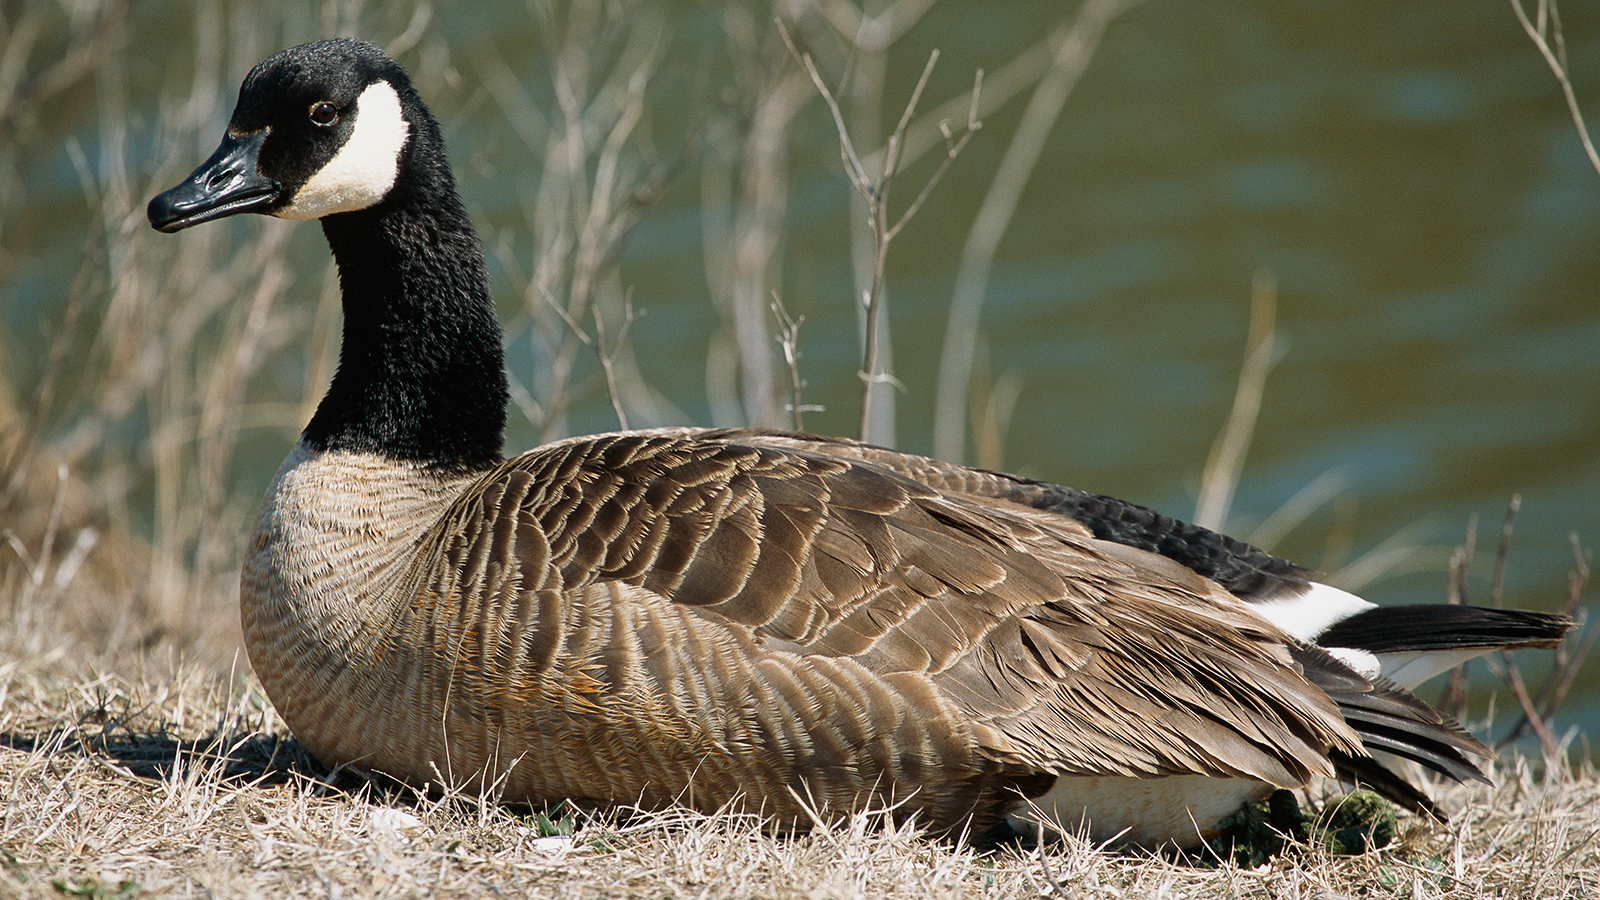 Portrait of a Canada goose, Branta canadensis, sitting near the water.